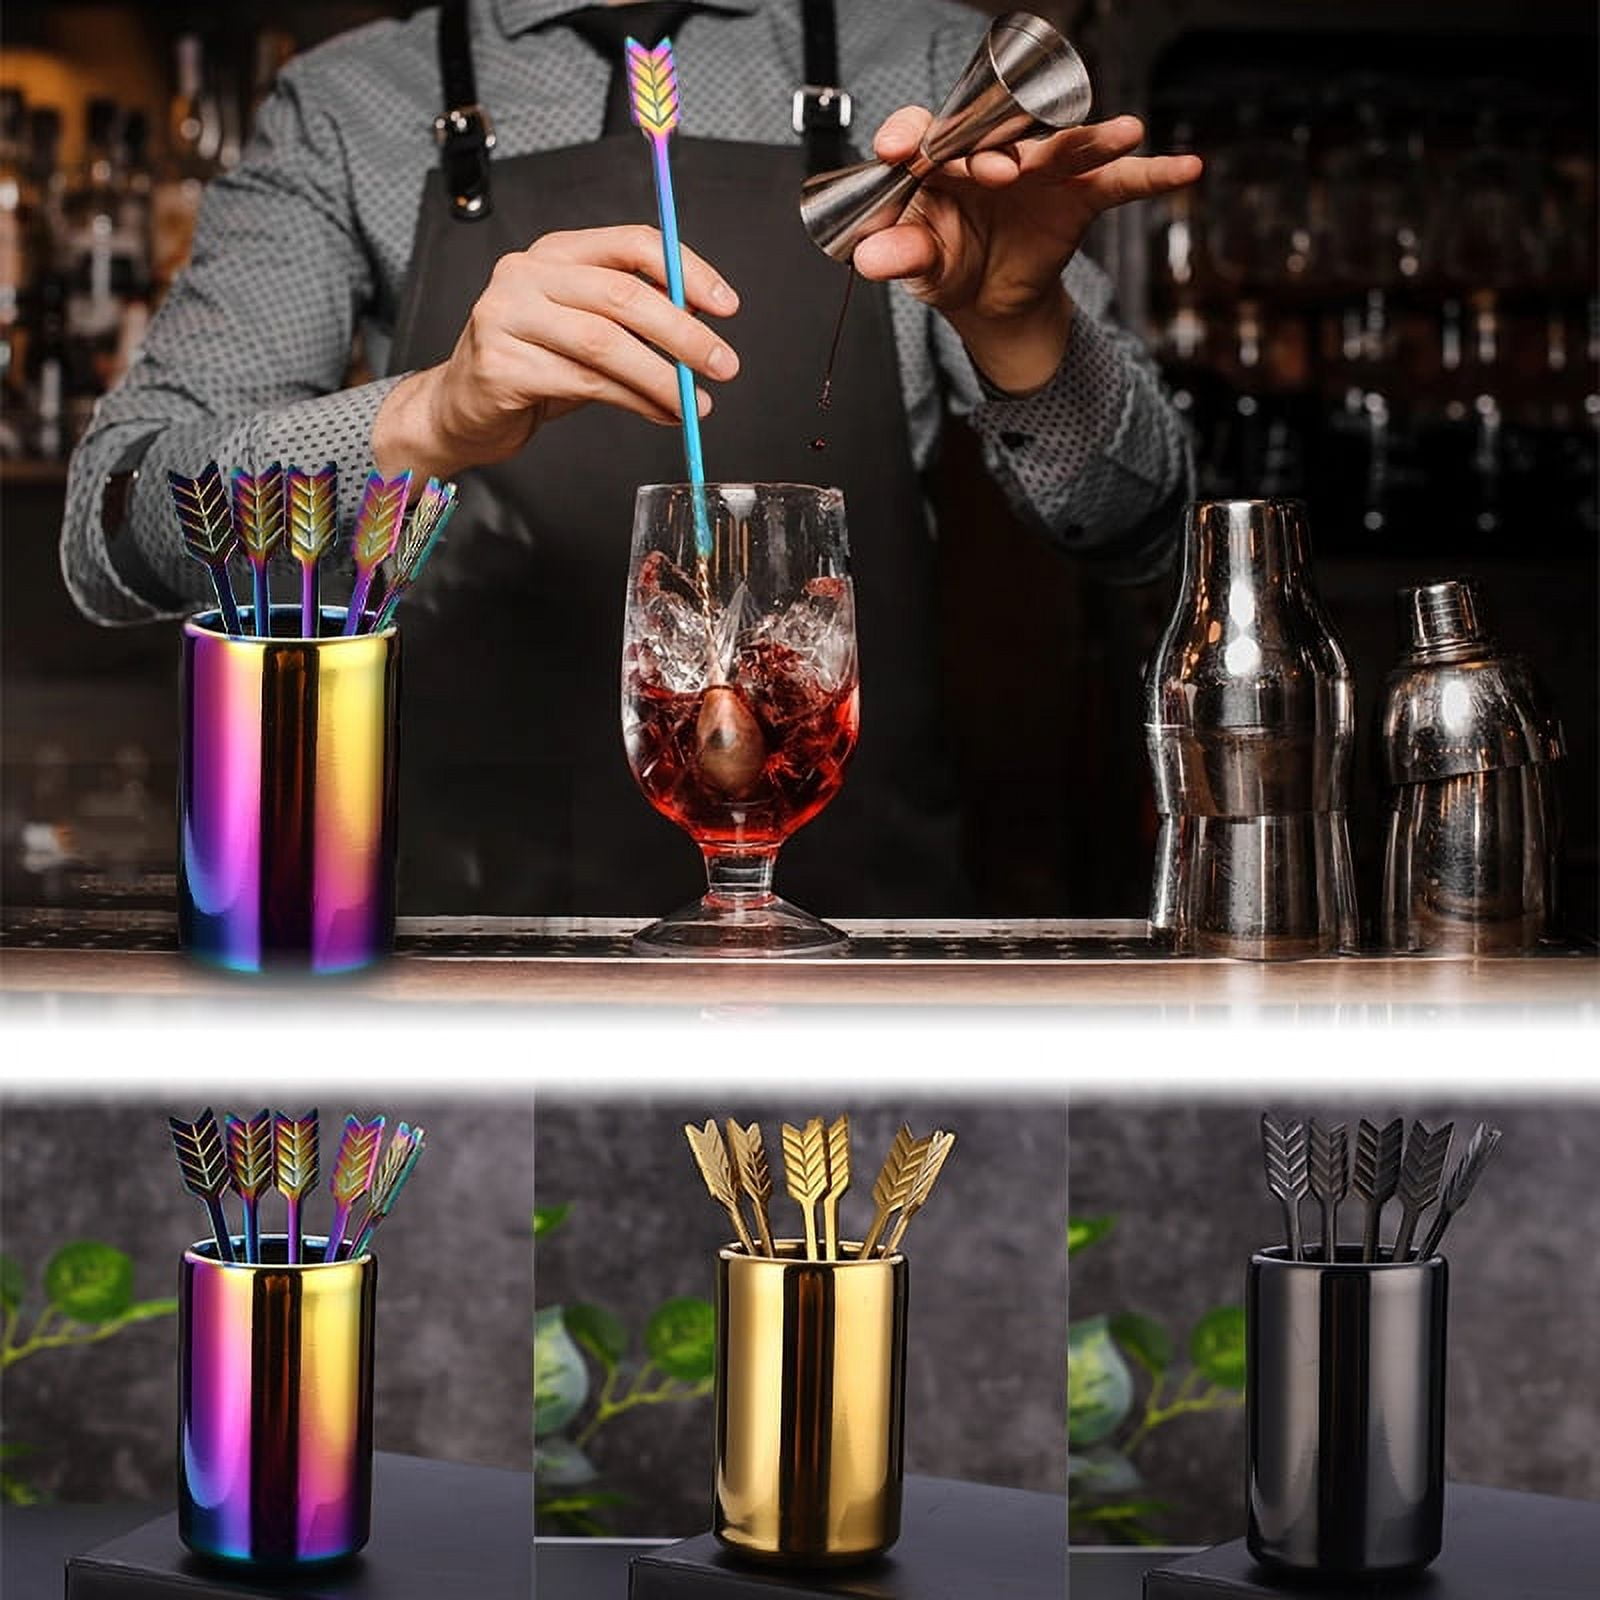 5 Pieces 7.4 Inch Stainless Steel Coffee Stirrers Holder Stainless Steel  Swizzle Stick Coffee Stirrers Reusable Stir Sticks for Cocktails Coffee